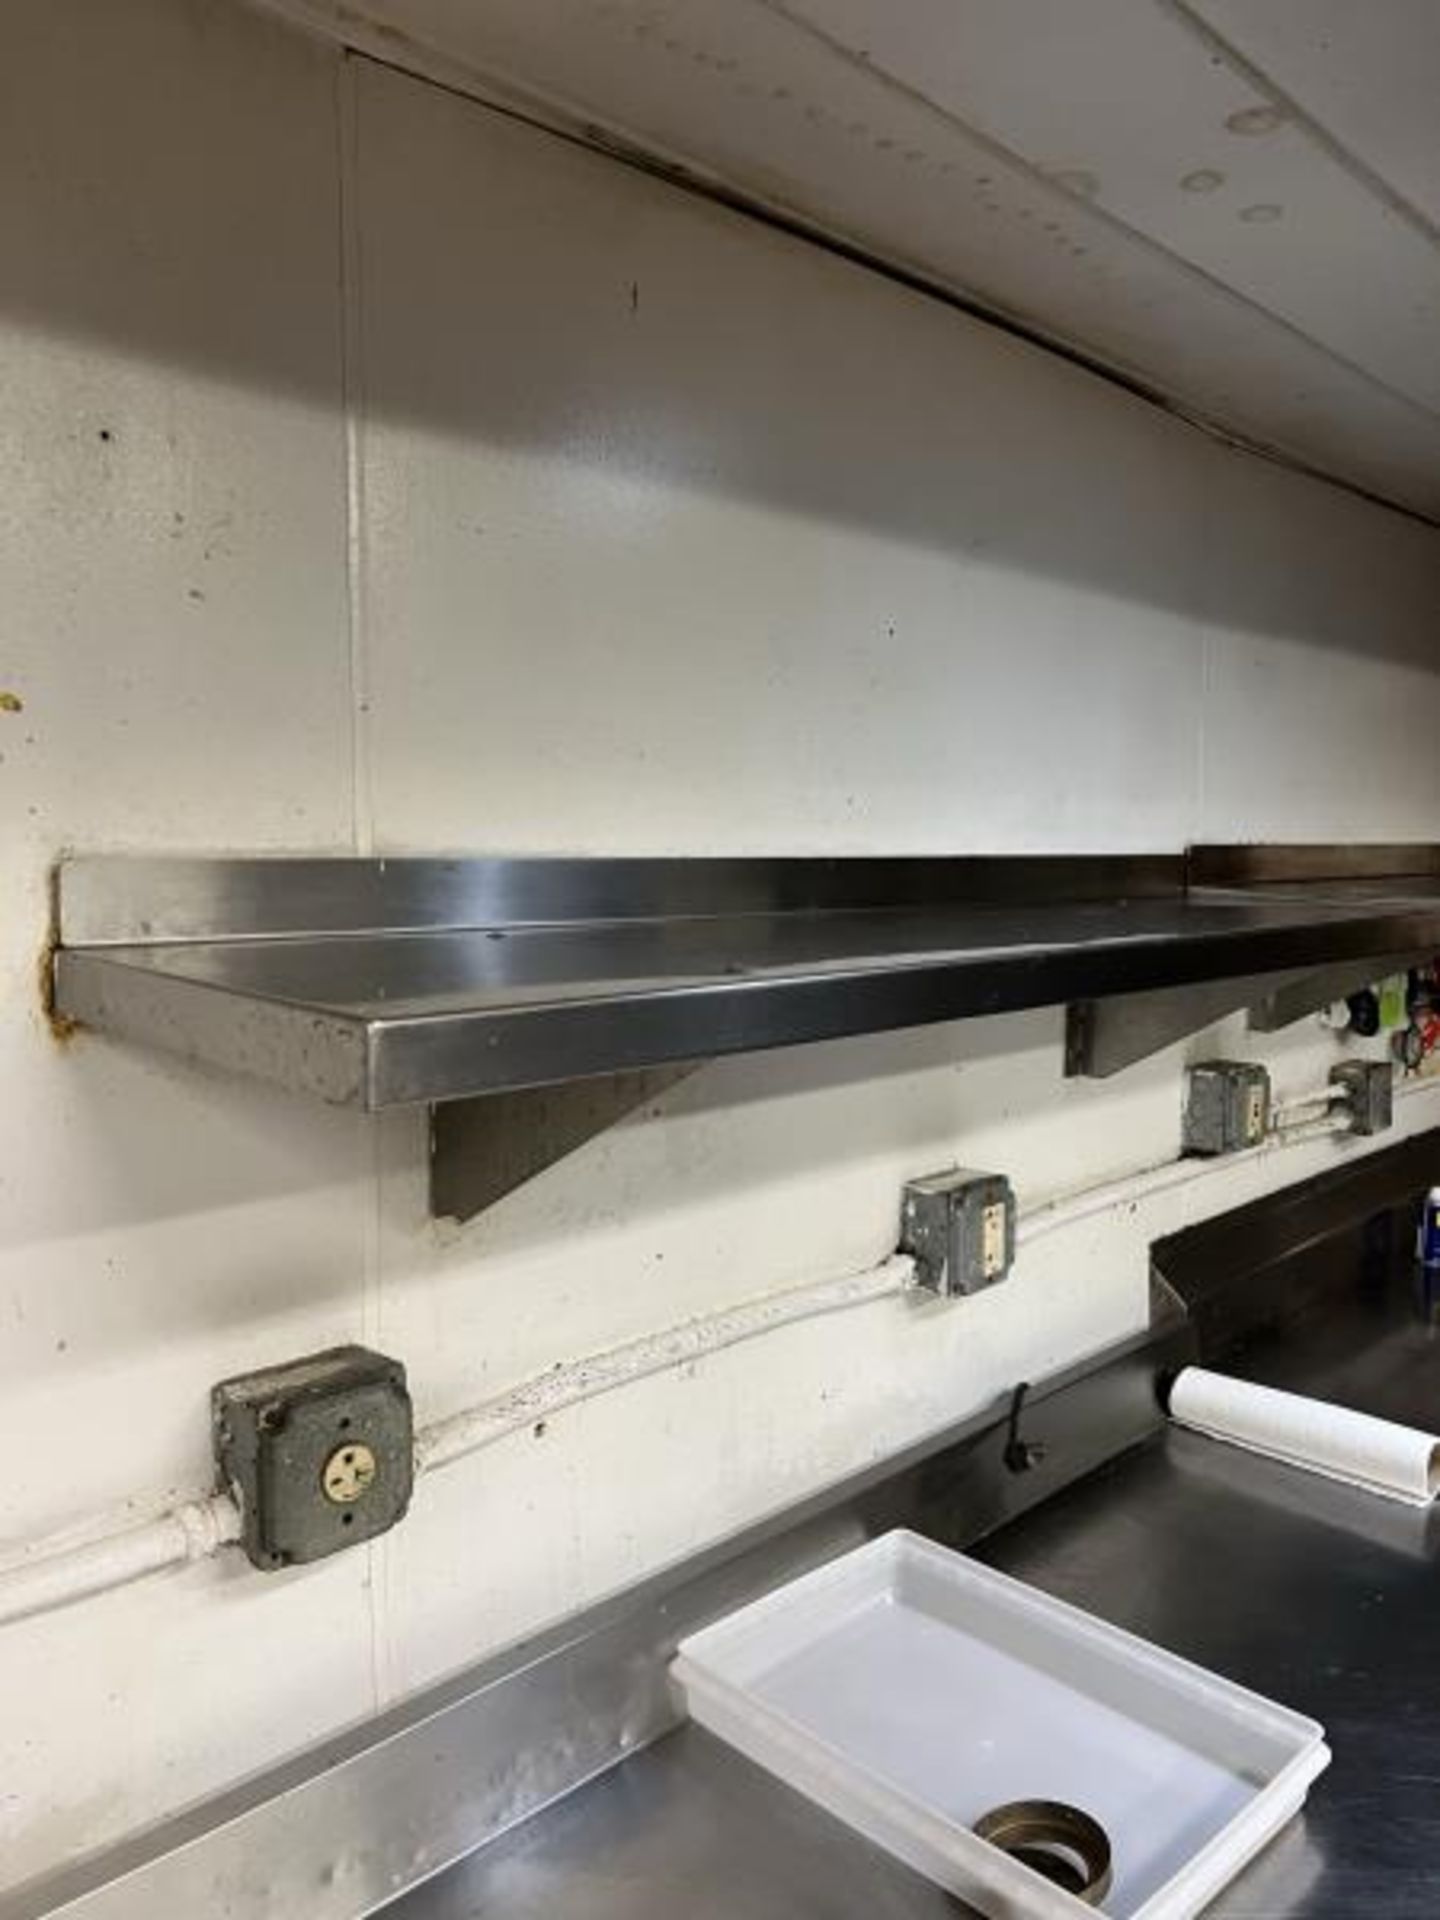 Stainless Steel Wall Mouthed Shelf in 2 Sections, 4.5' & 6' in Main Kitchen - Image 3 of 7